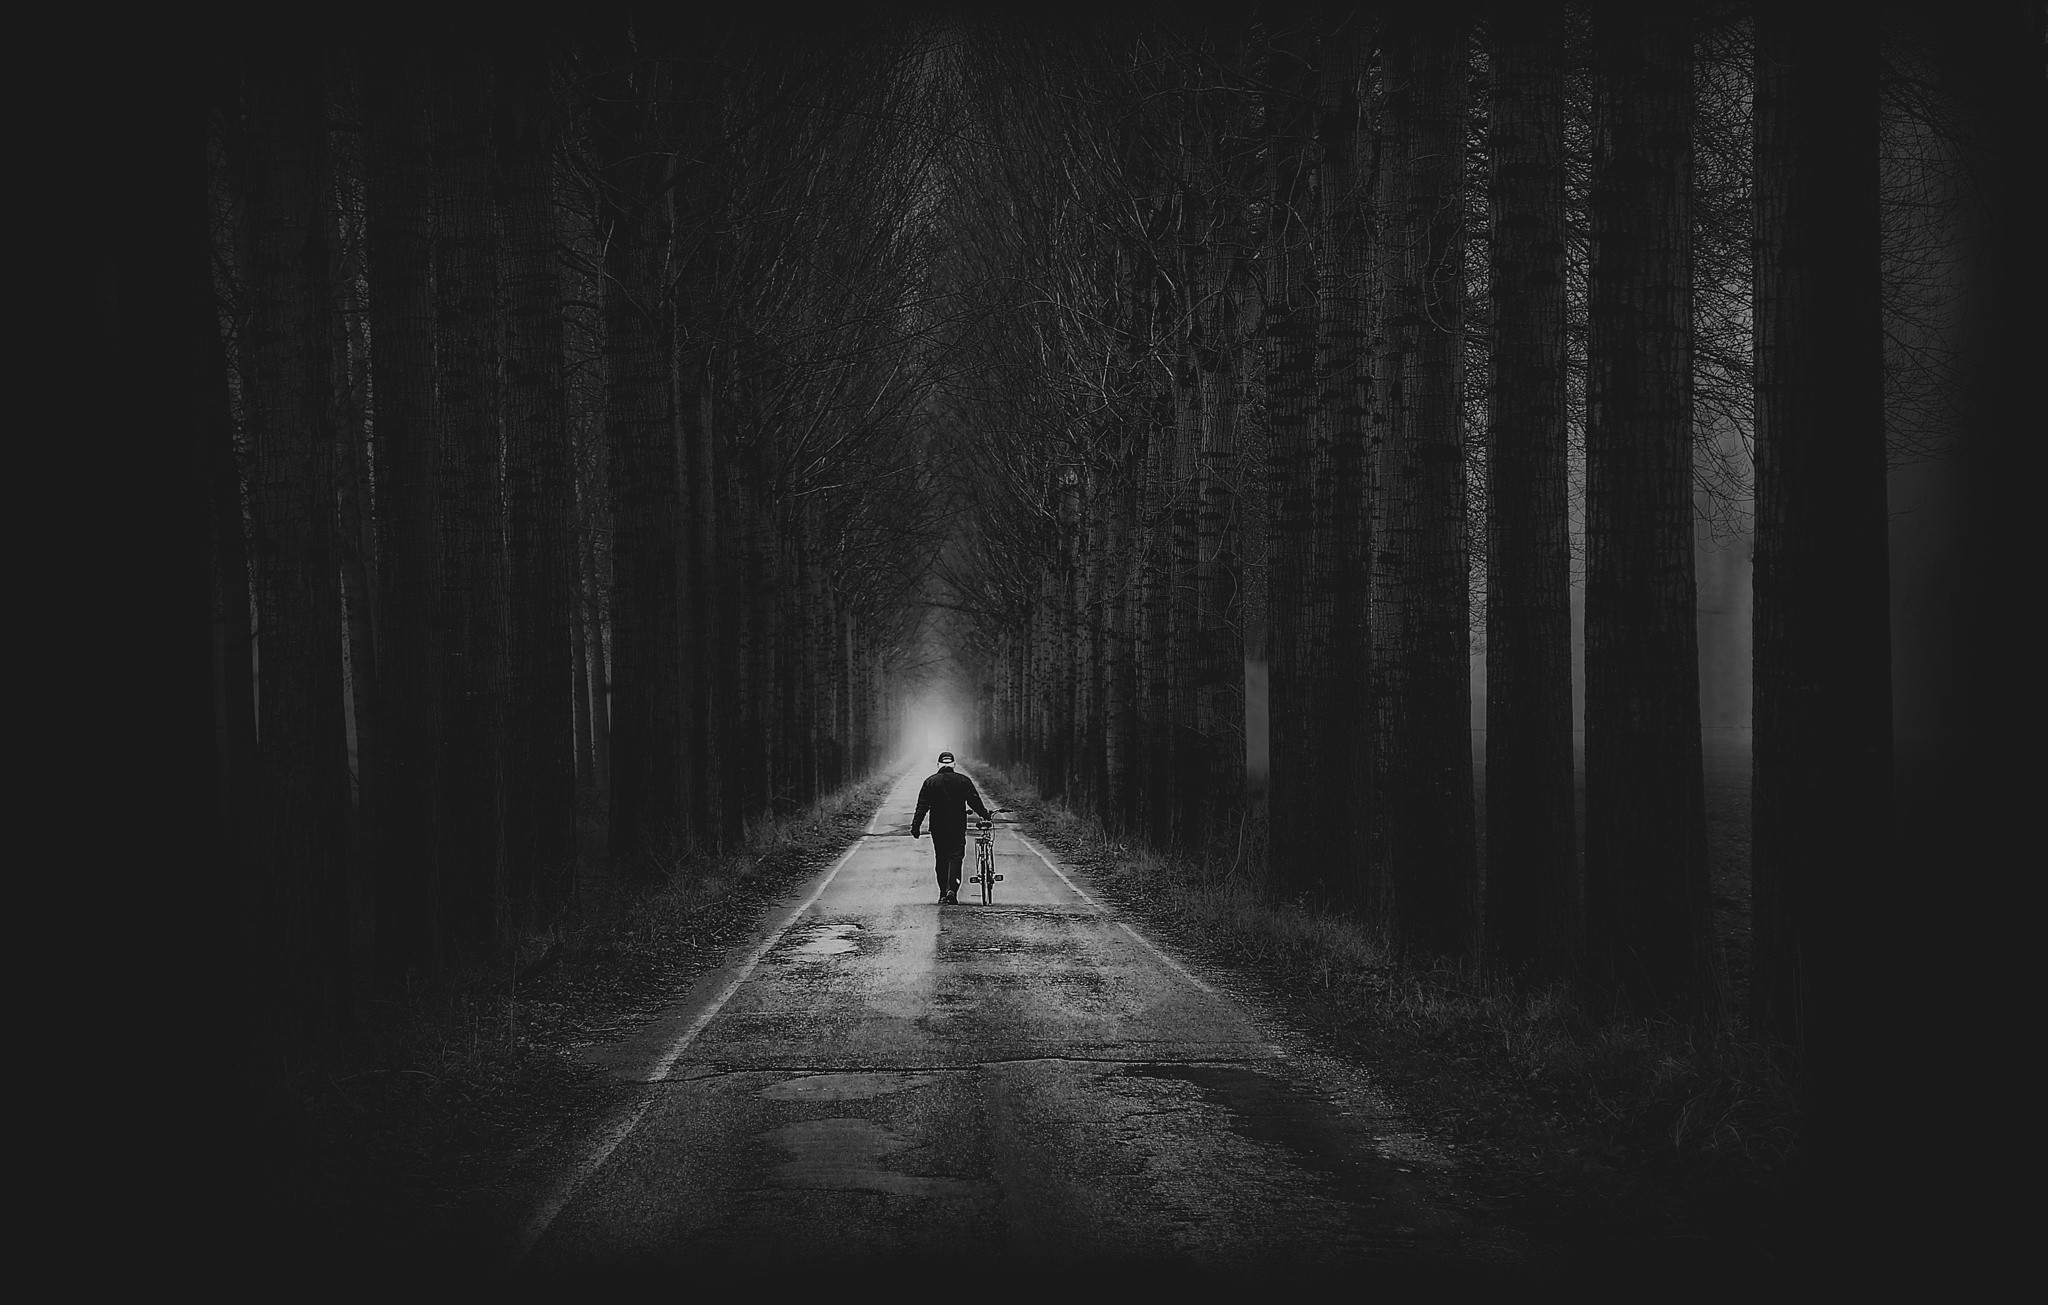 General 2048x1305 alone dark monochrome men long road in-line trees bicycle